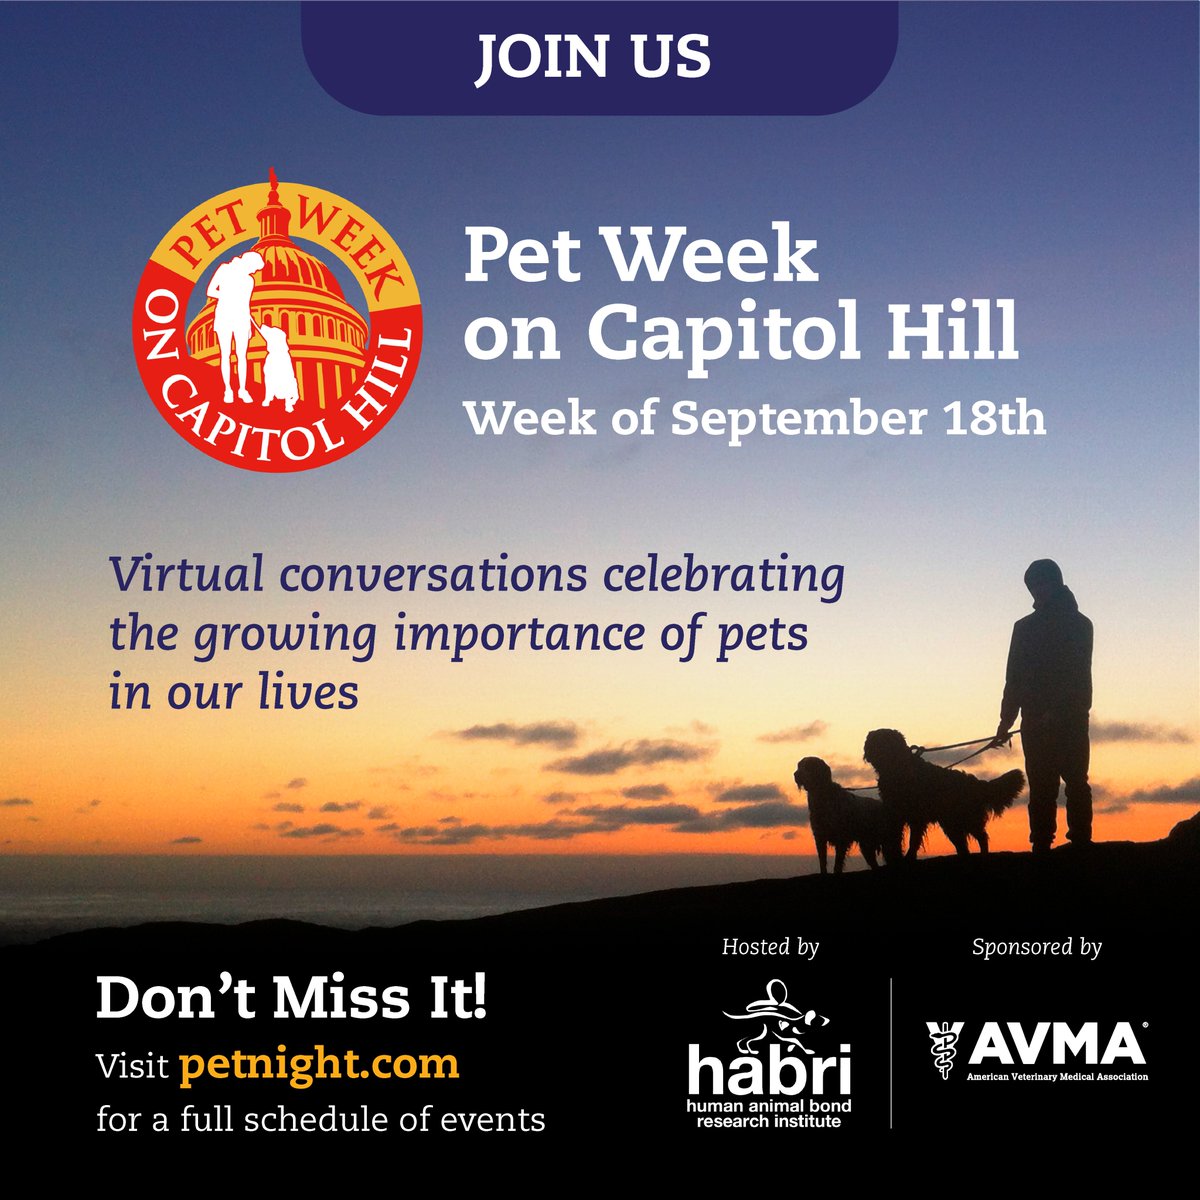 As a proud sponsor of #PetWeekonCapitolHill, the AVMA is teaming up with @HABRITweets to celebrate the power of pets with a series of FREE weeklong educational programing that features experts in pet care, animal health, research, and policy. Join us: PetNight.com